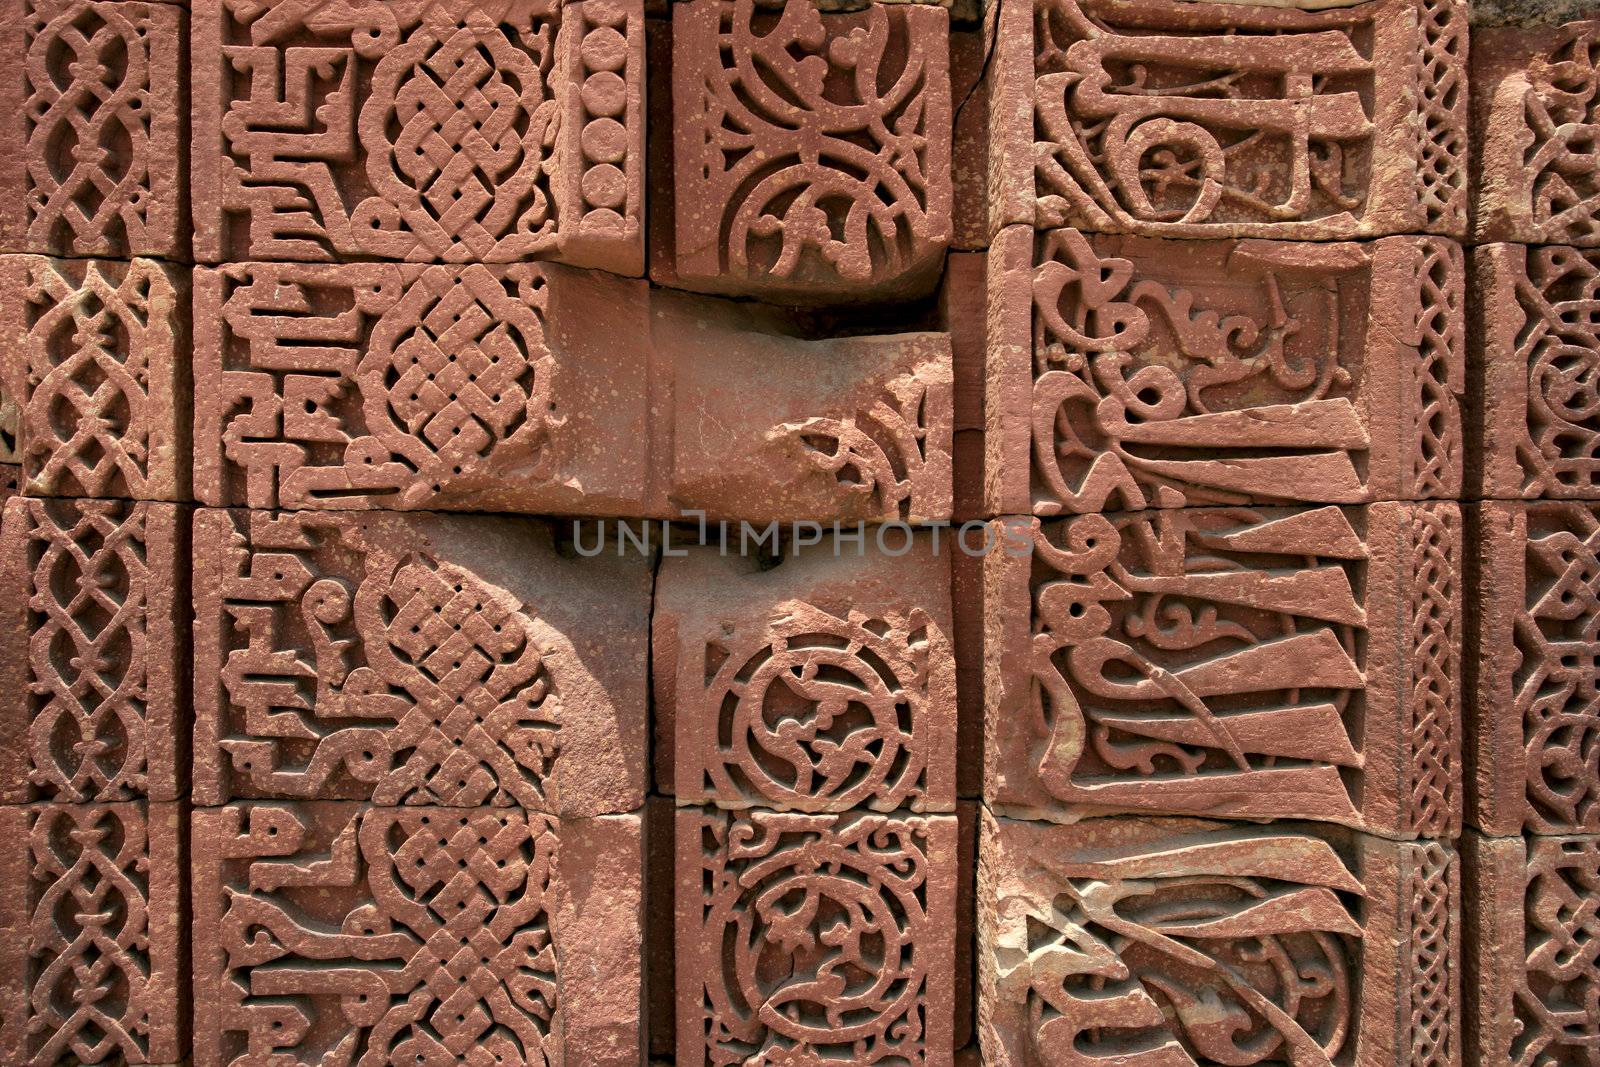 Details of a carved stone monument in Delhi, India.
